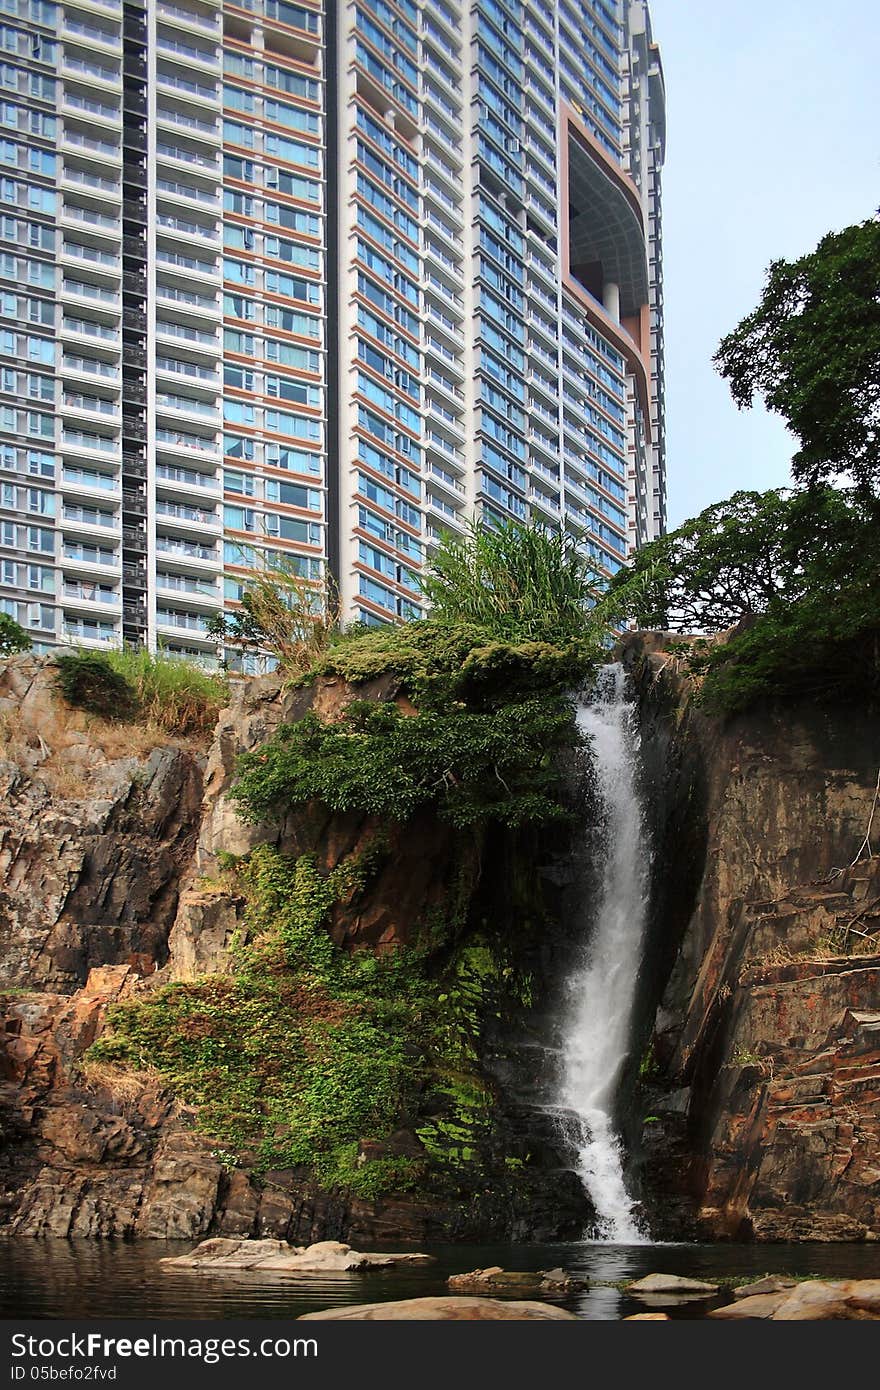 The architecture and nature, skyscrapers and waterfalls are located side by side on Hong Kong Island.